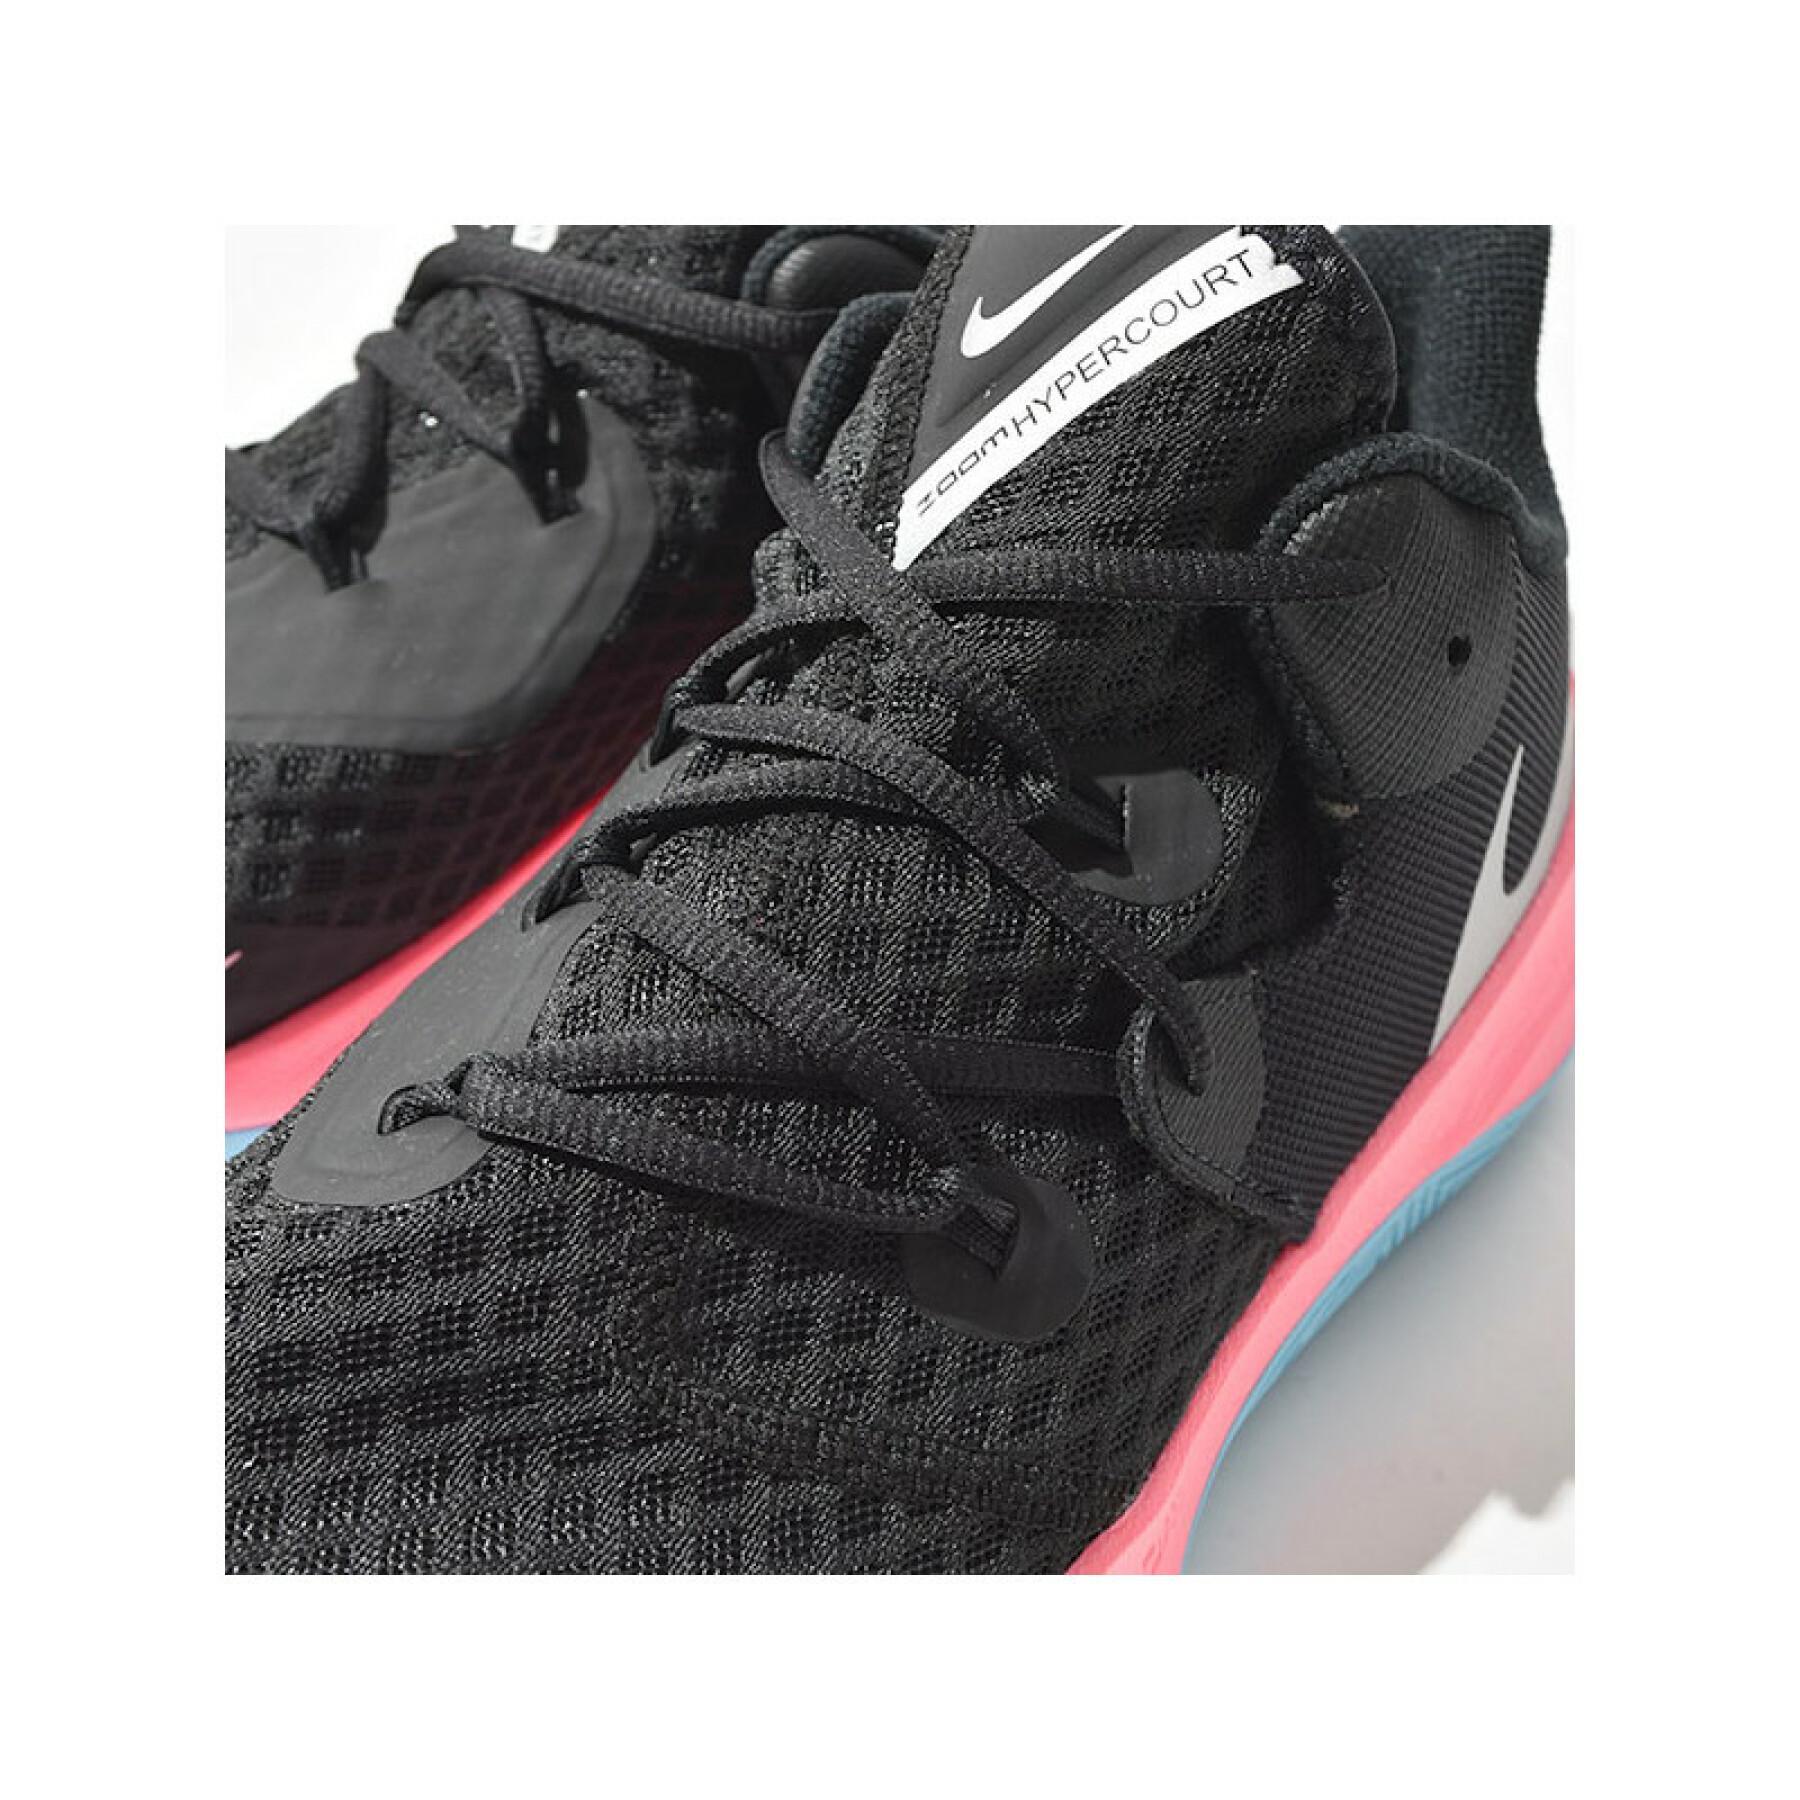 Chaussures Nike Zoom Hyperspeed Court 